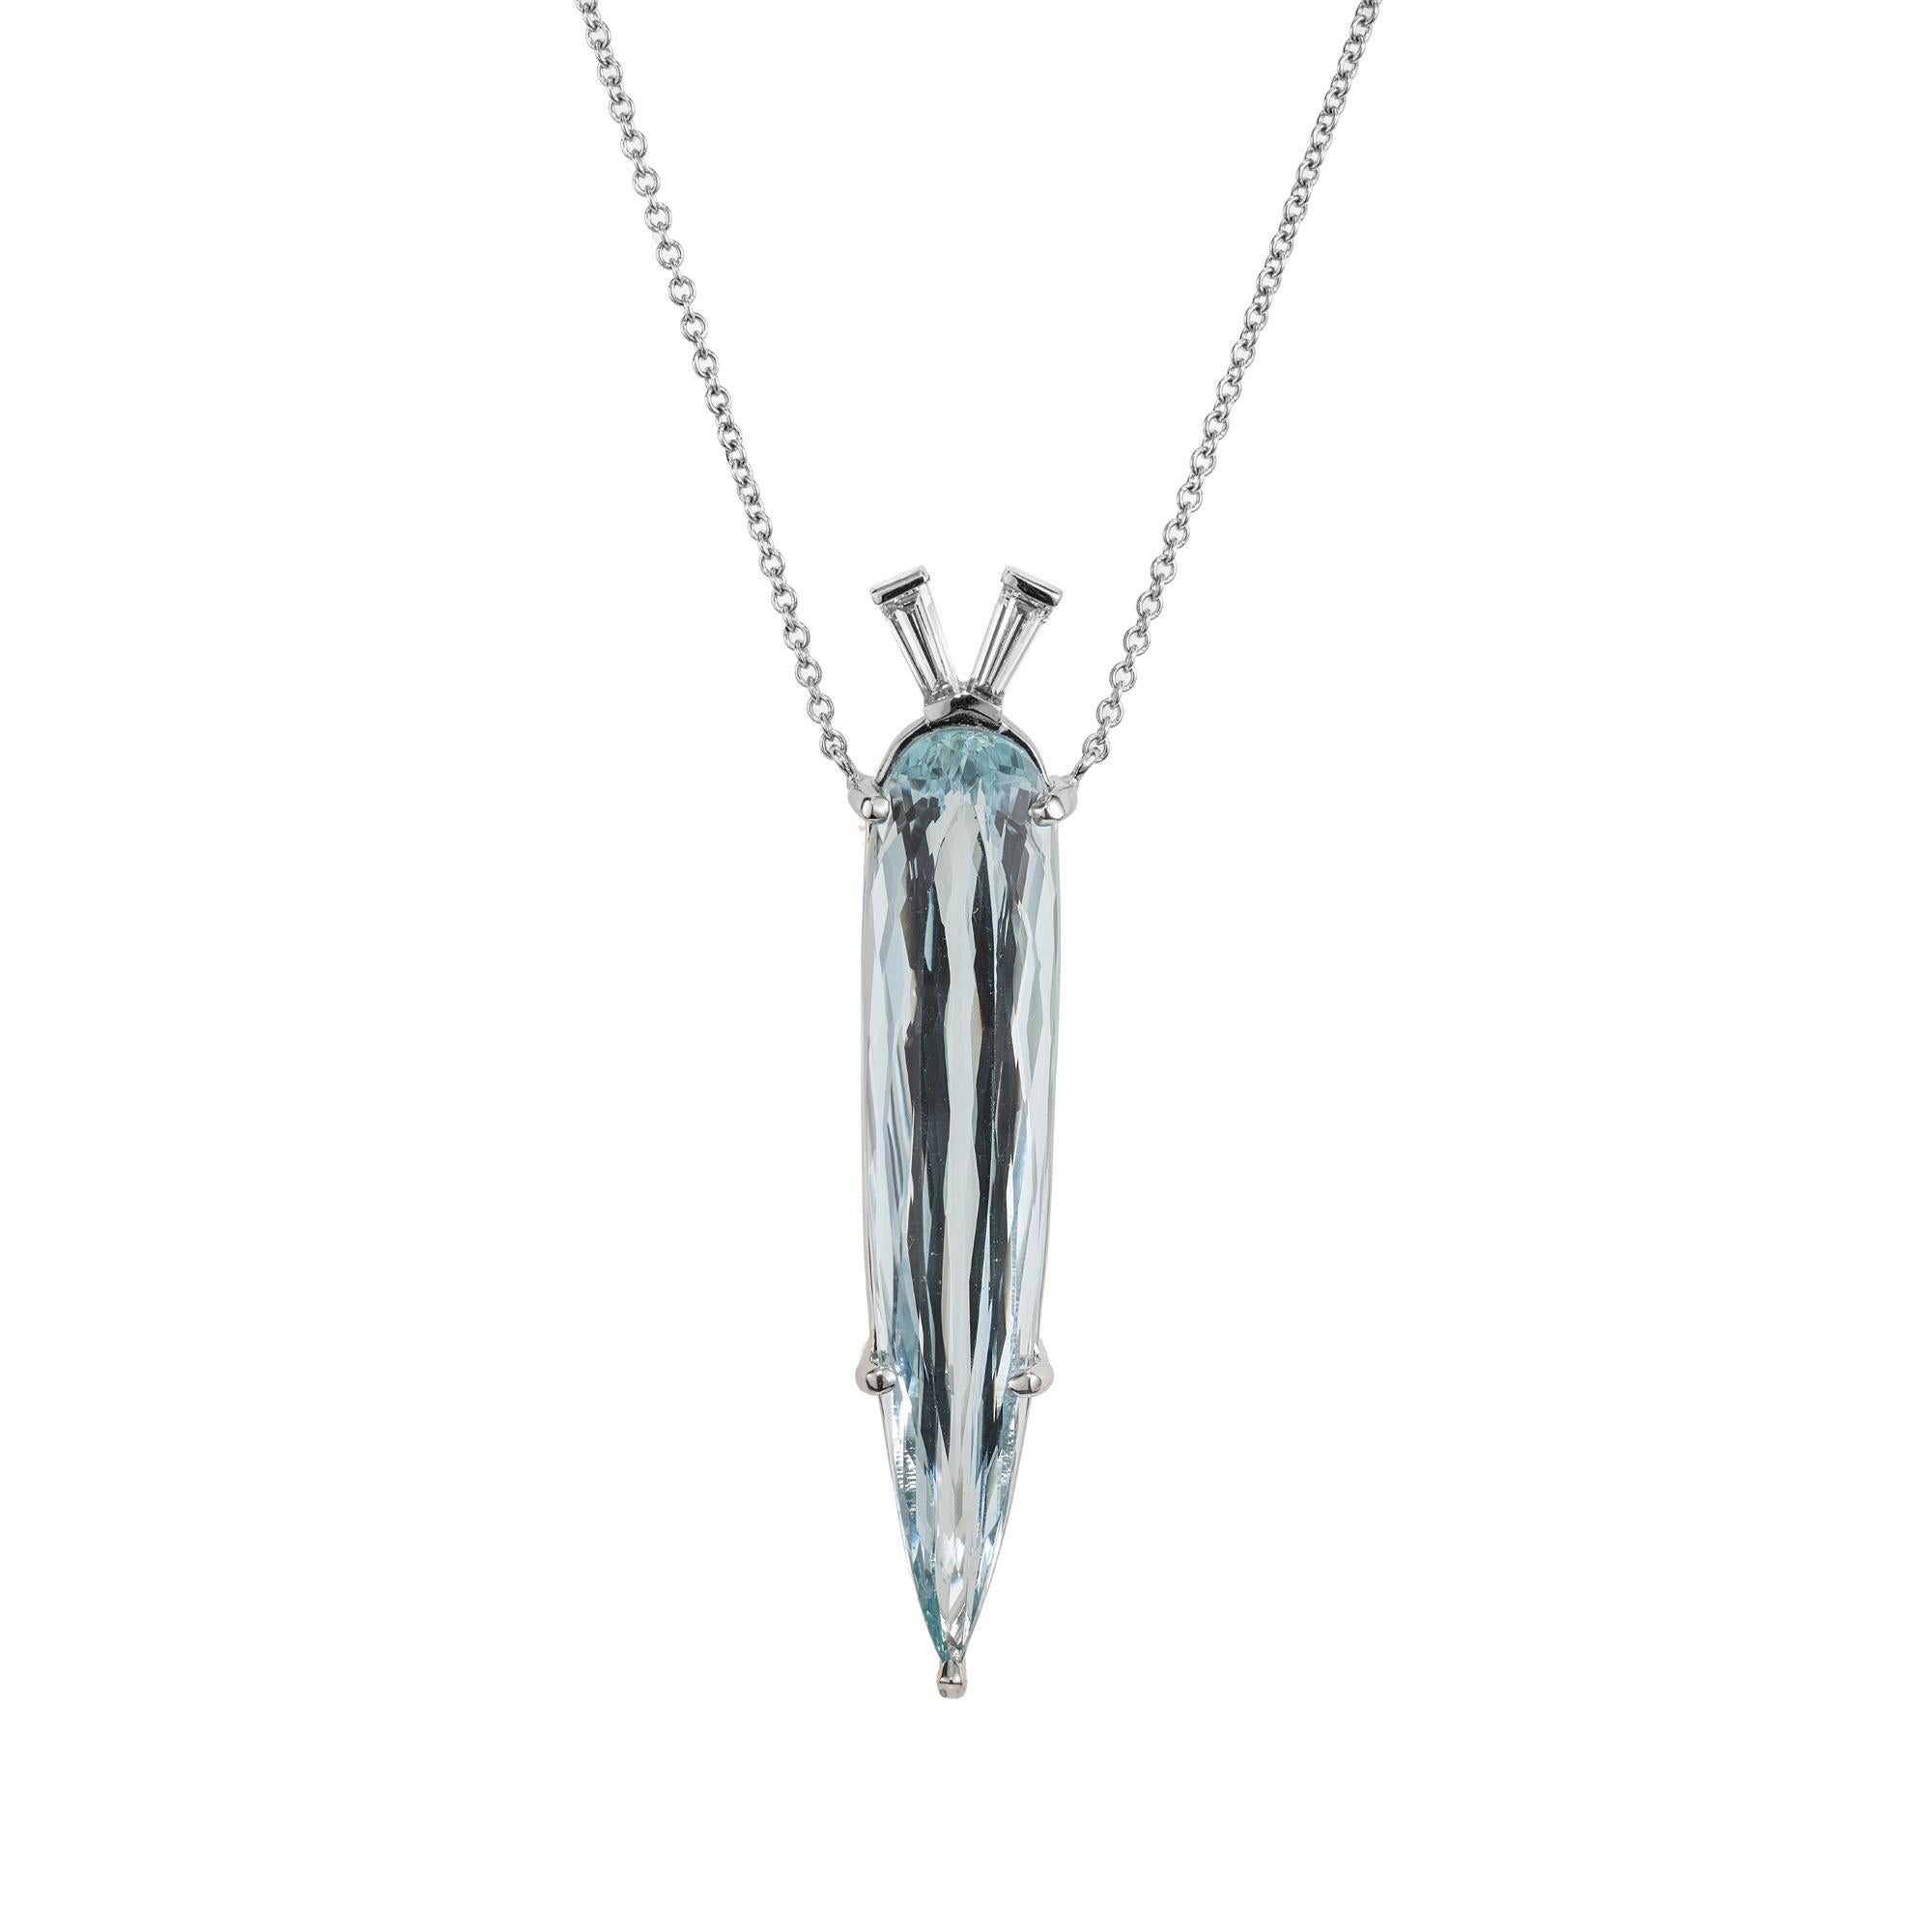 Spectacular 15.31 carat elongated pear shape aqua from an early 1900's estate, made into a one of a kind pendant with tow tapered baguette diamond accents. Brand new setting and simple cable chain allow the pendant to be worn 18 or 16 Inches long.